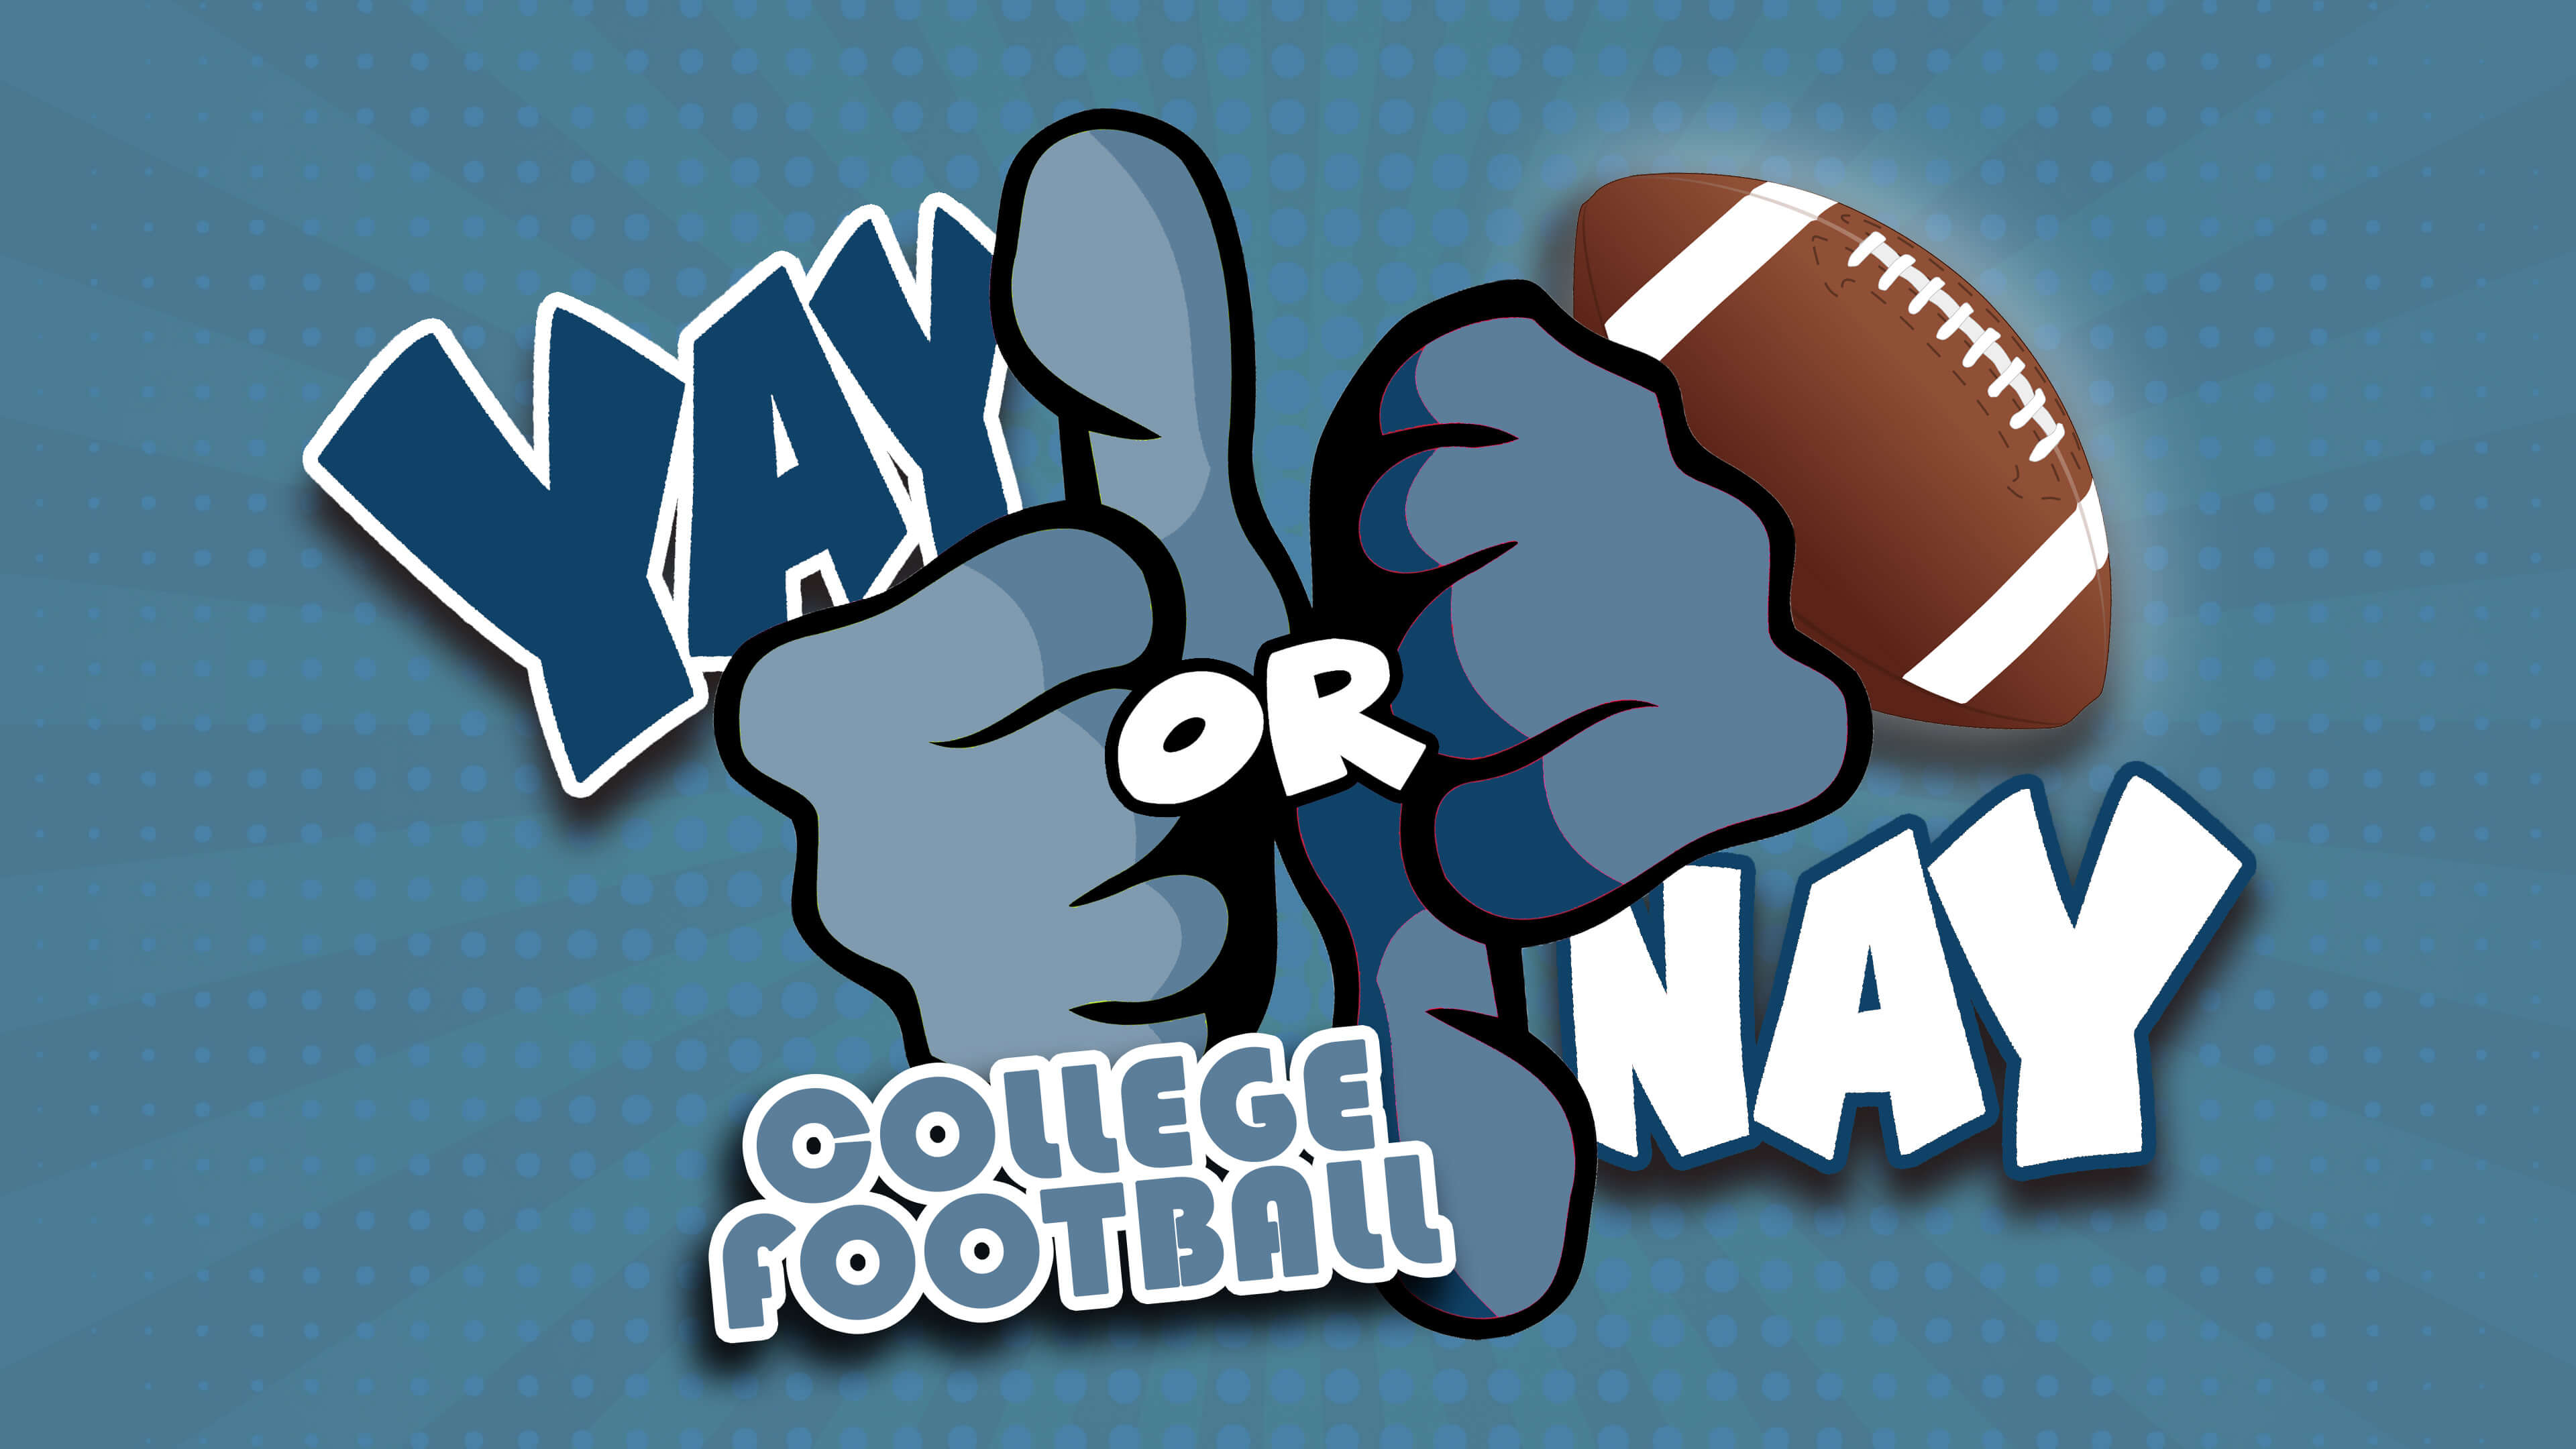 Yay Or Nay: College Football